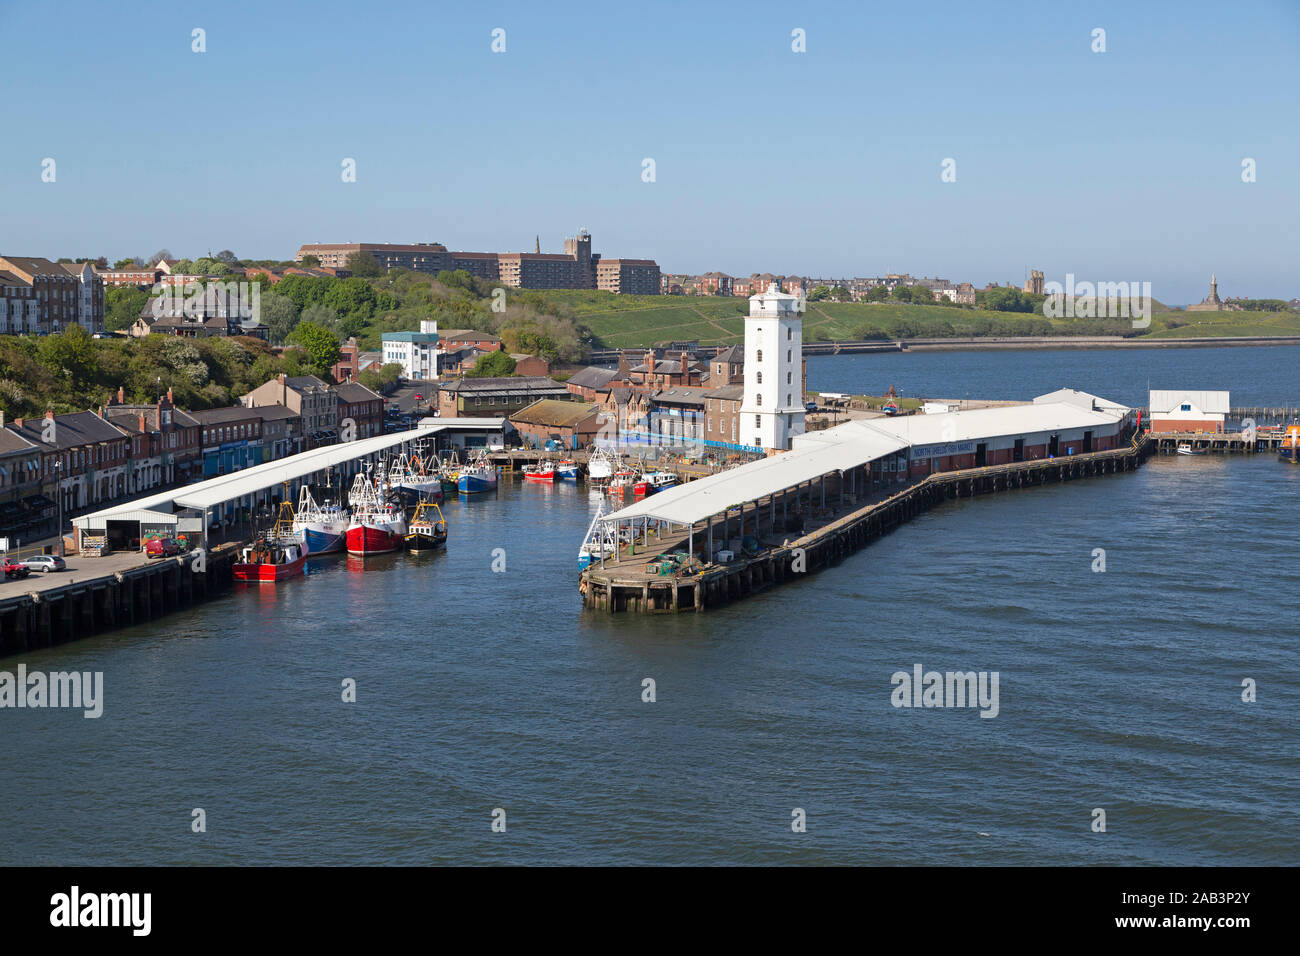 Fishing boats docked at North Shields, England. They boats deliver their catch to North Shields Fish Market. Stock Photo